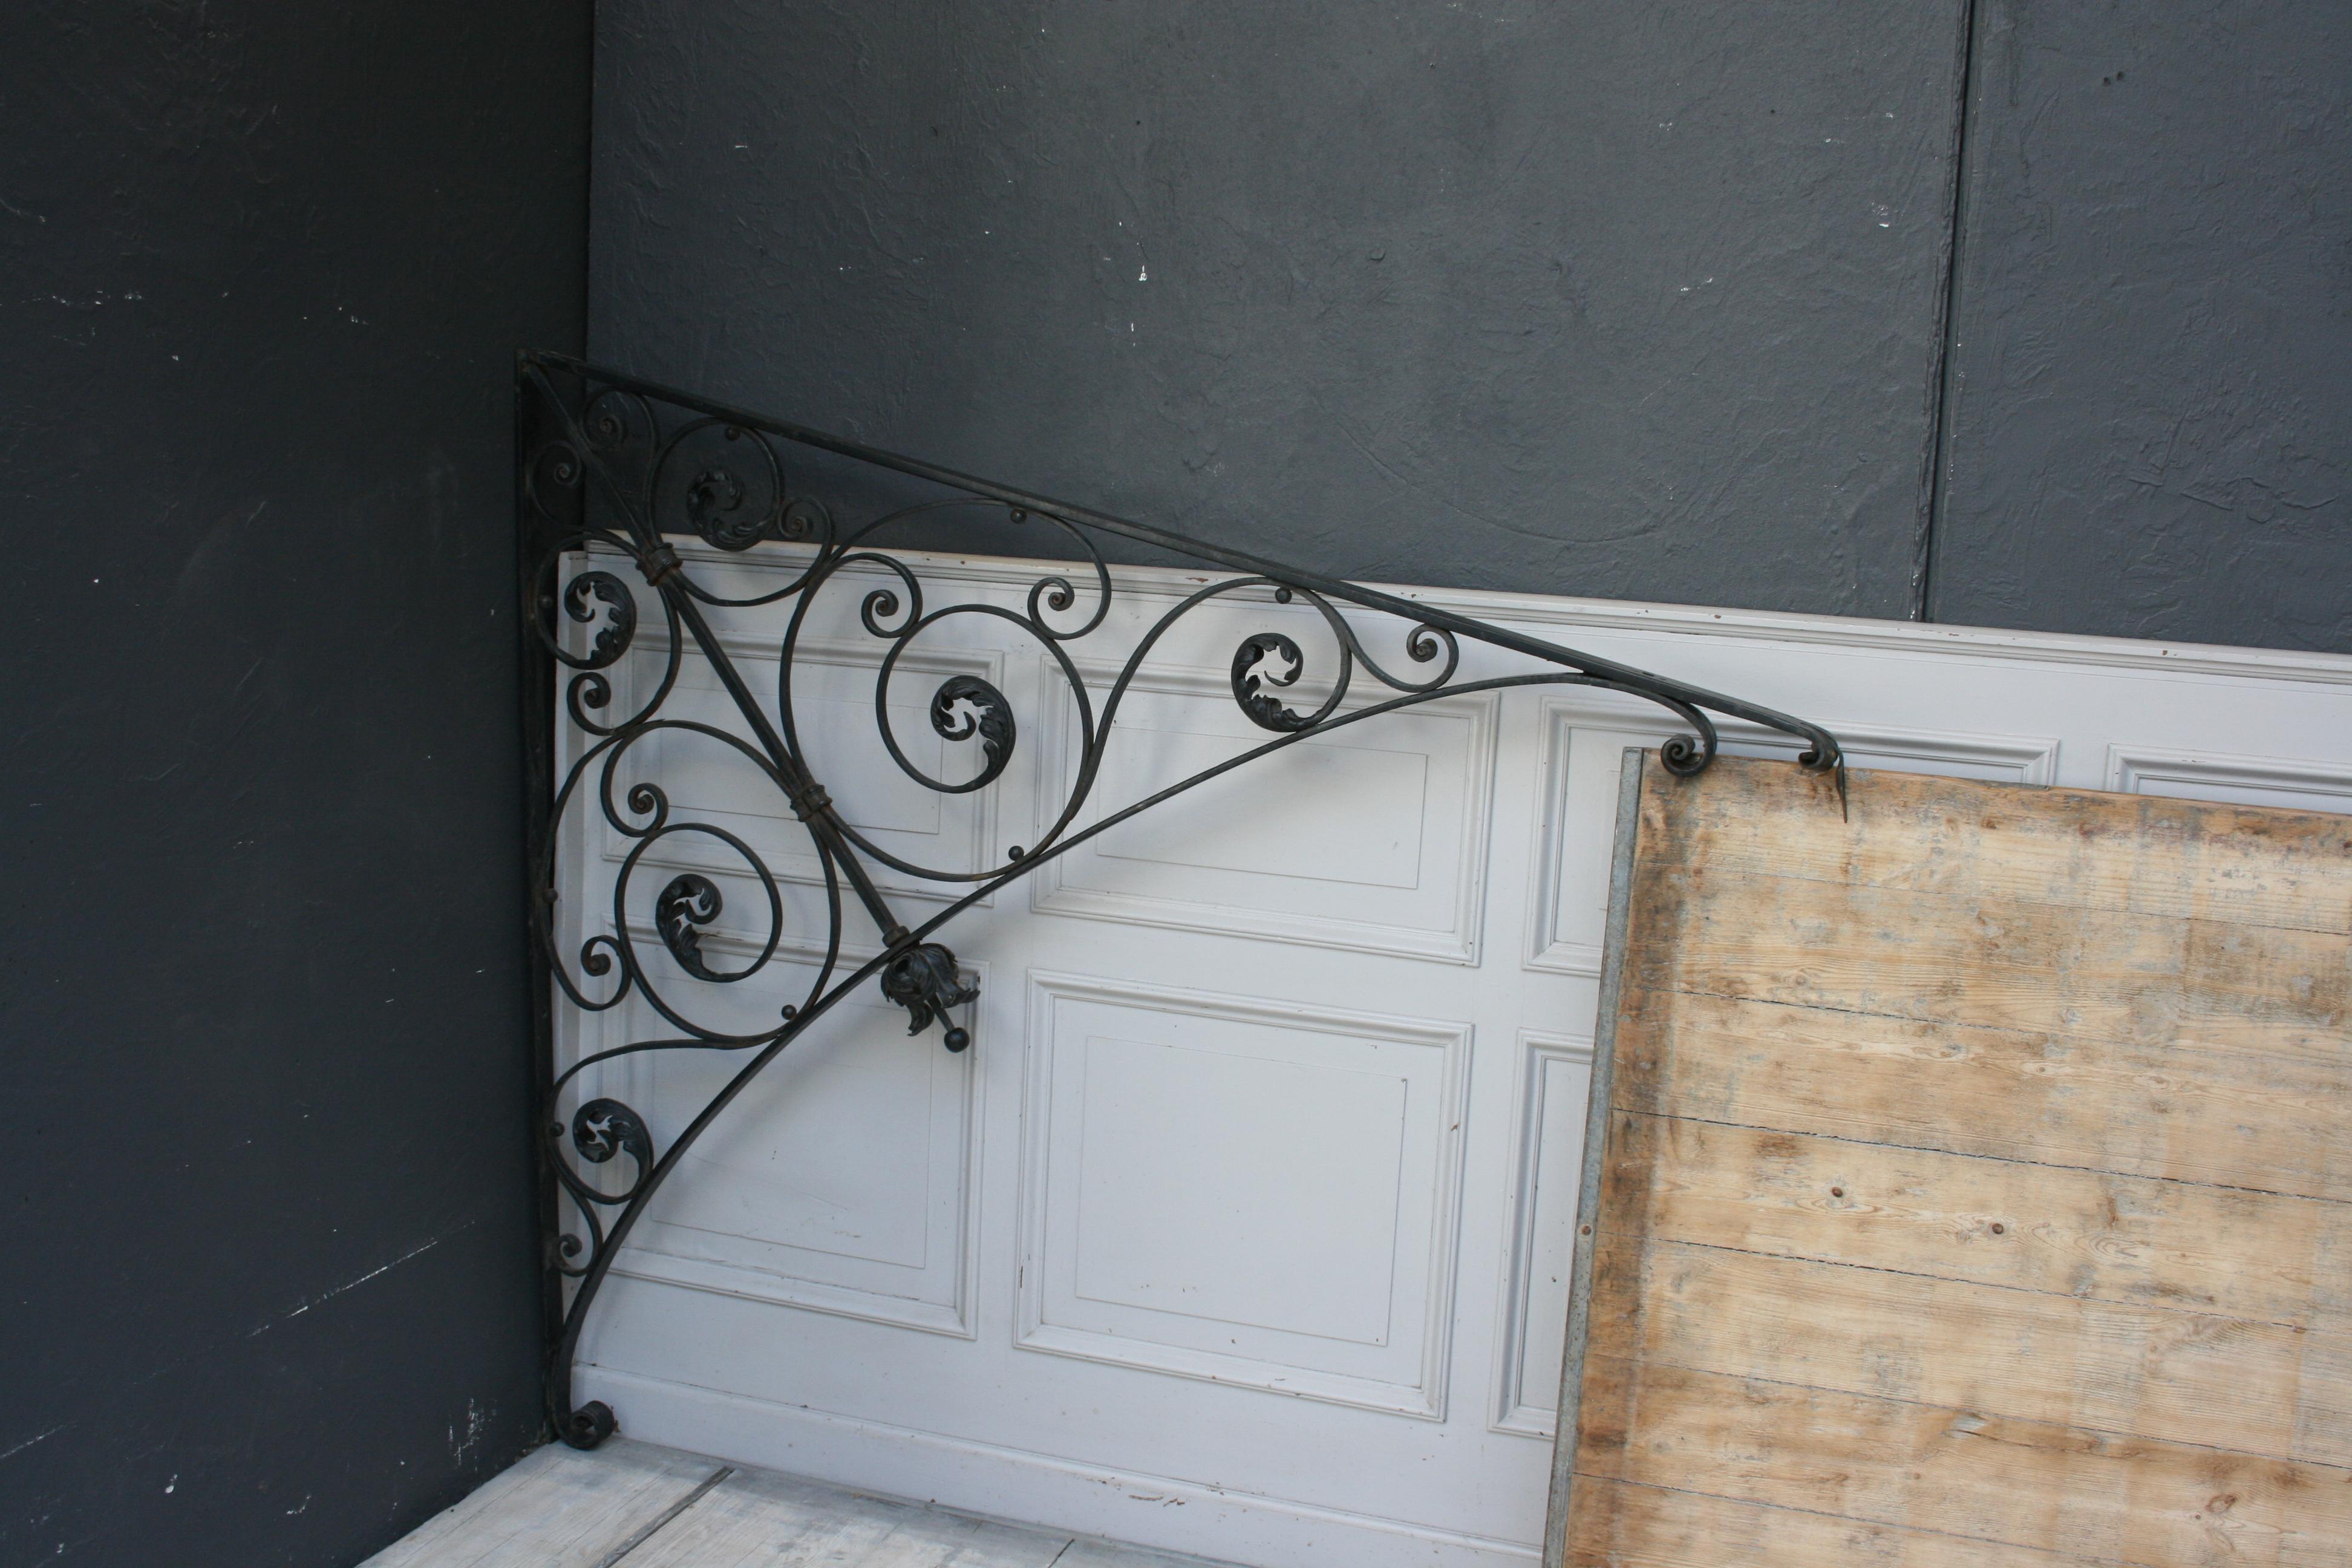 Large wall-mounted iron bracket/ roof rack from France circa 1900, in anthracite-grey paint.
Also as a very decorative piece e.g. standing on a sideboard or hanging on the wall.
Dimensions:
149 cm x 168 cm / 58,66 inch x 66,14 inch,
200 cm